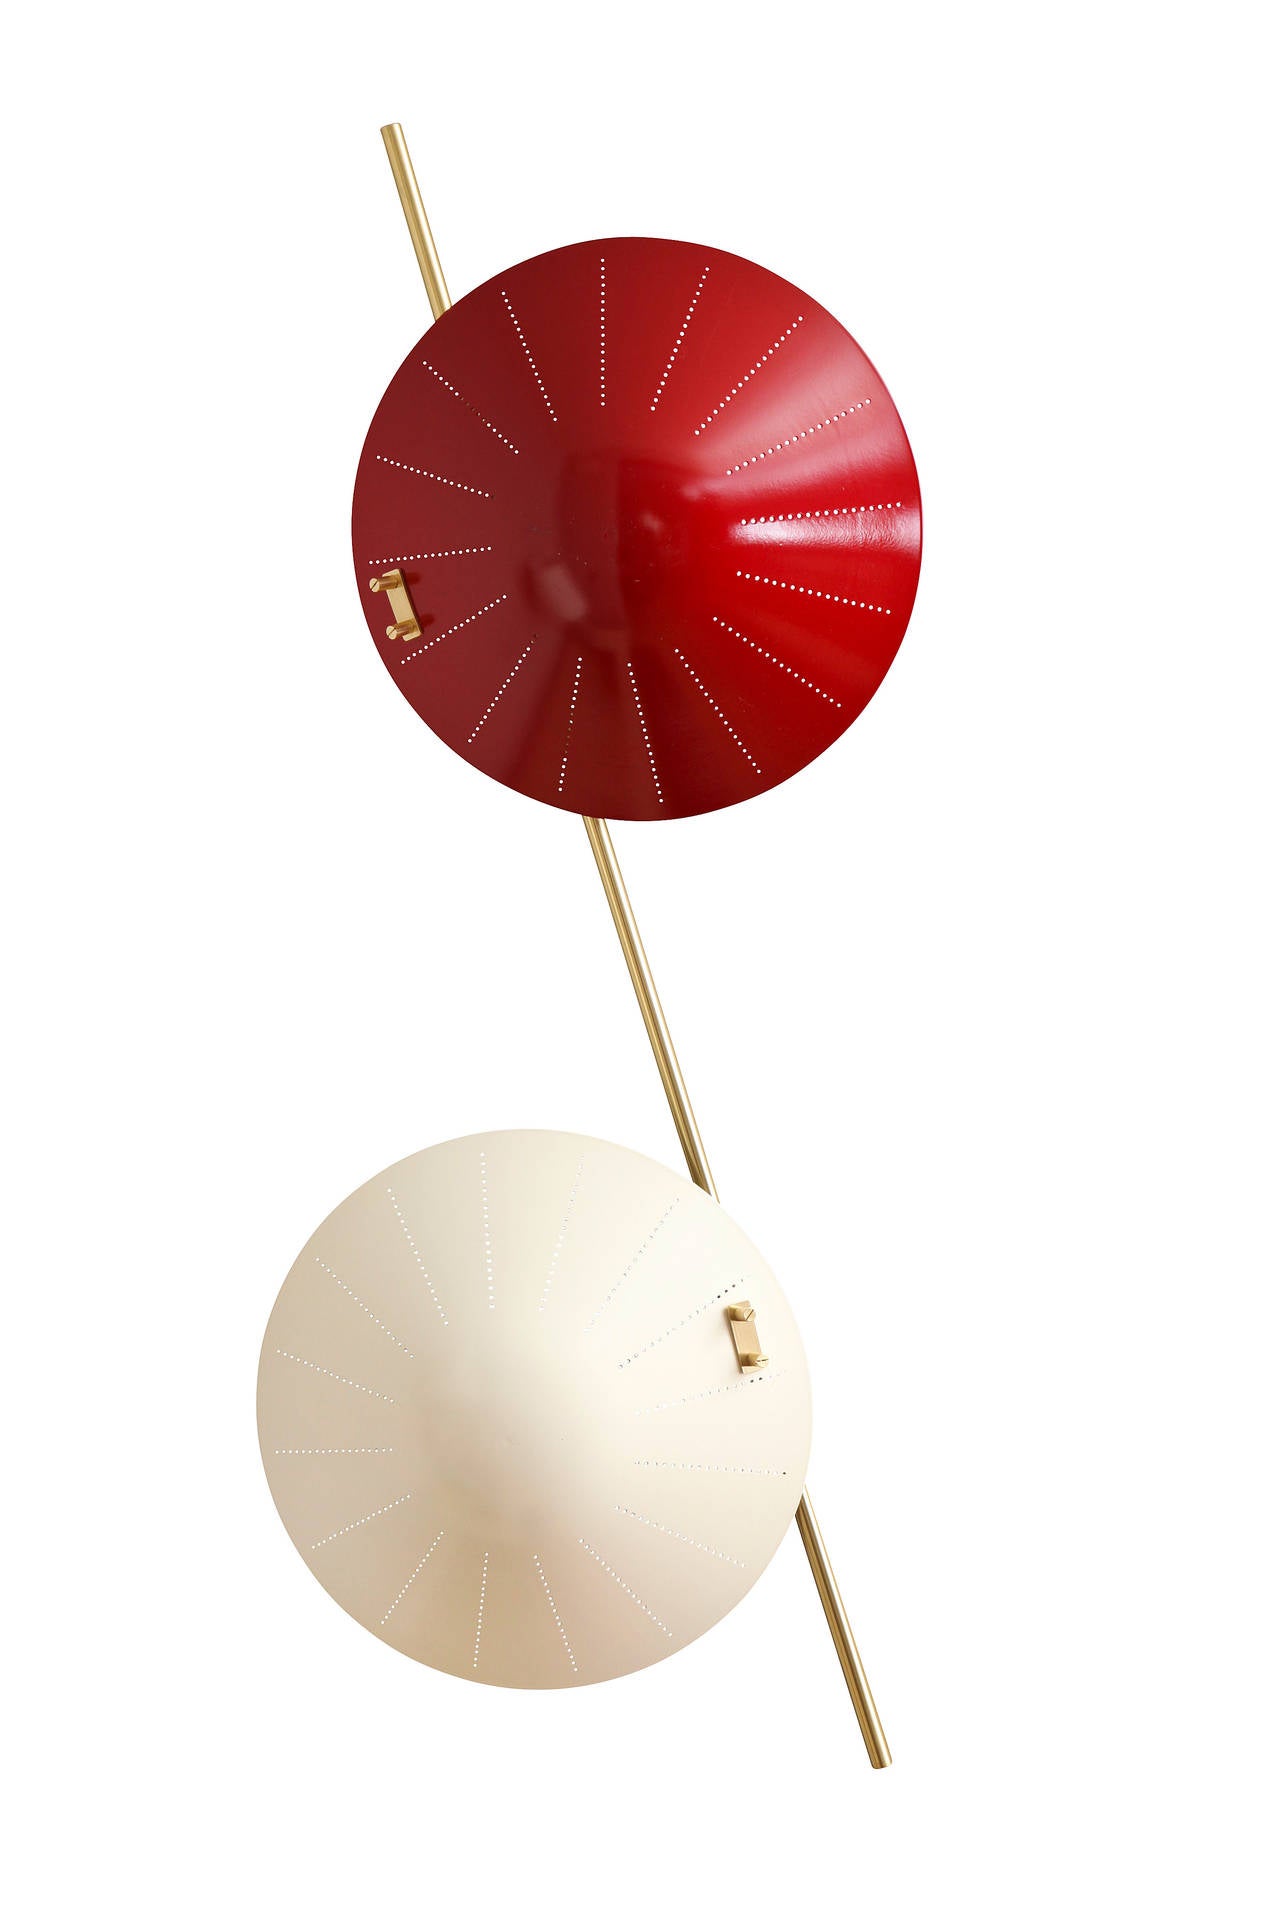 A pair of two light wall sconces each socket concealed by round shallow dish shaped shade with sunburst pattern perforation emitting light. The upper shade painted red, the lower shade painted white connected by diagonal brass rod.